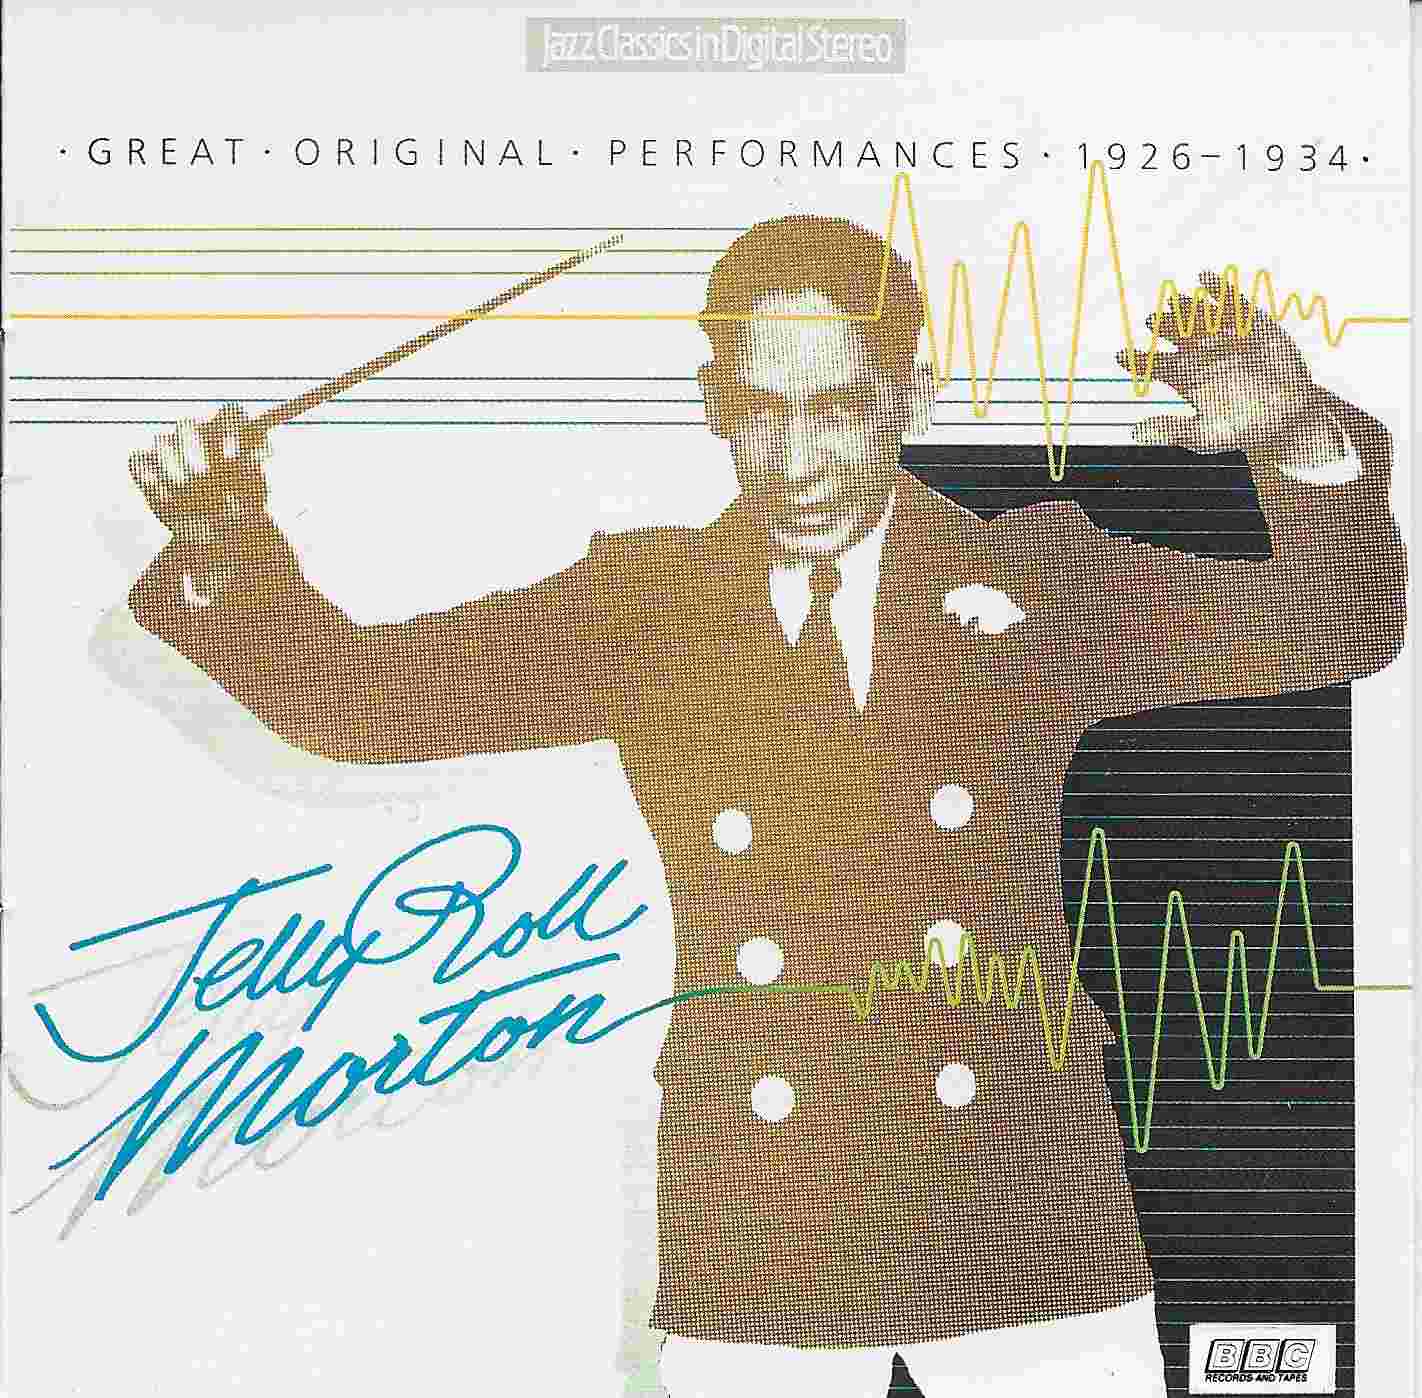 Picture of BBCCD604 Jazz Classics - Jelly Roll Morton by artist Jelly Roll Morton from the BBC records and Tapes library